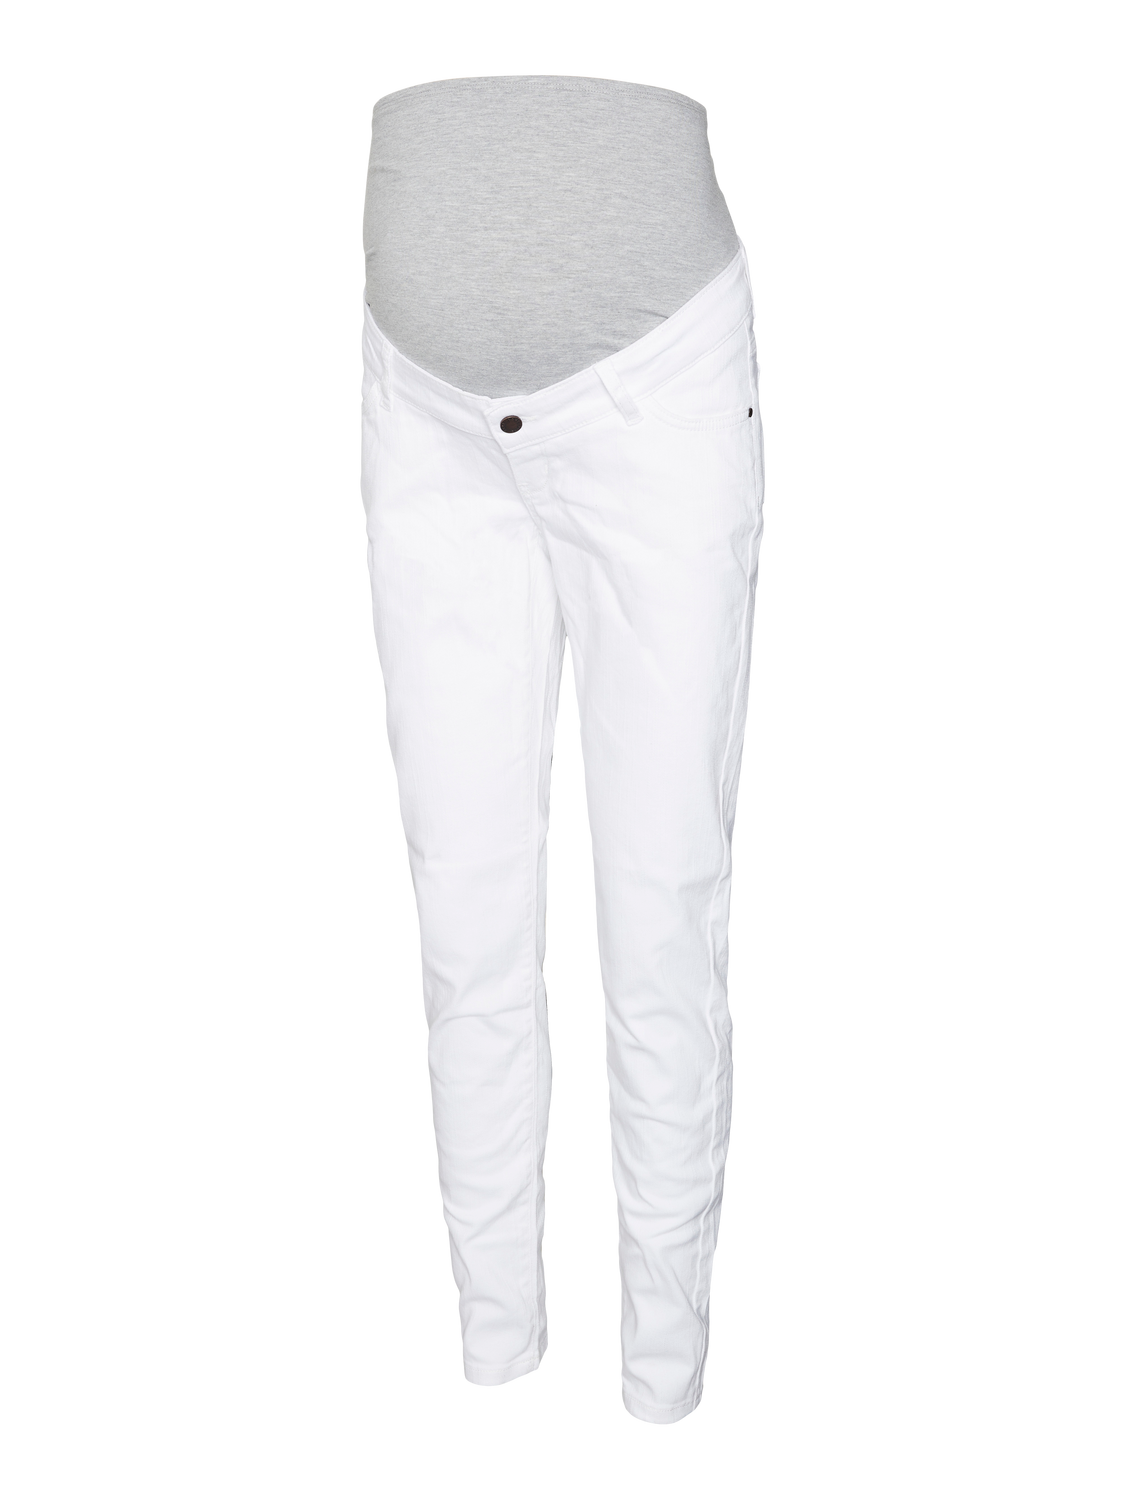 MAMA.LICIOUS Jeans Slim Fit Taille moyenne -Antique White - 20020025